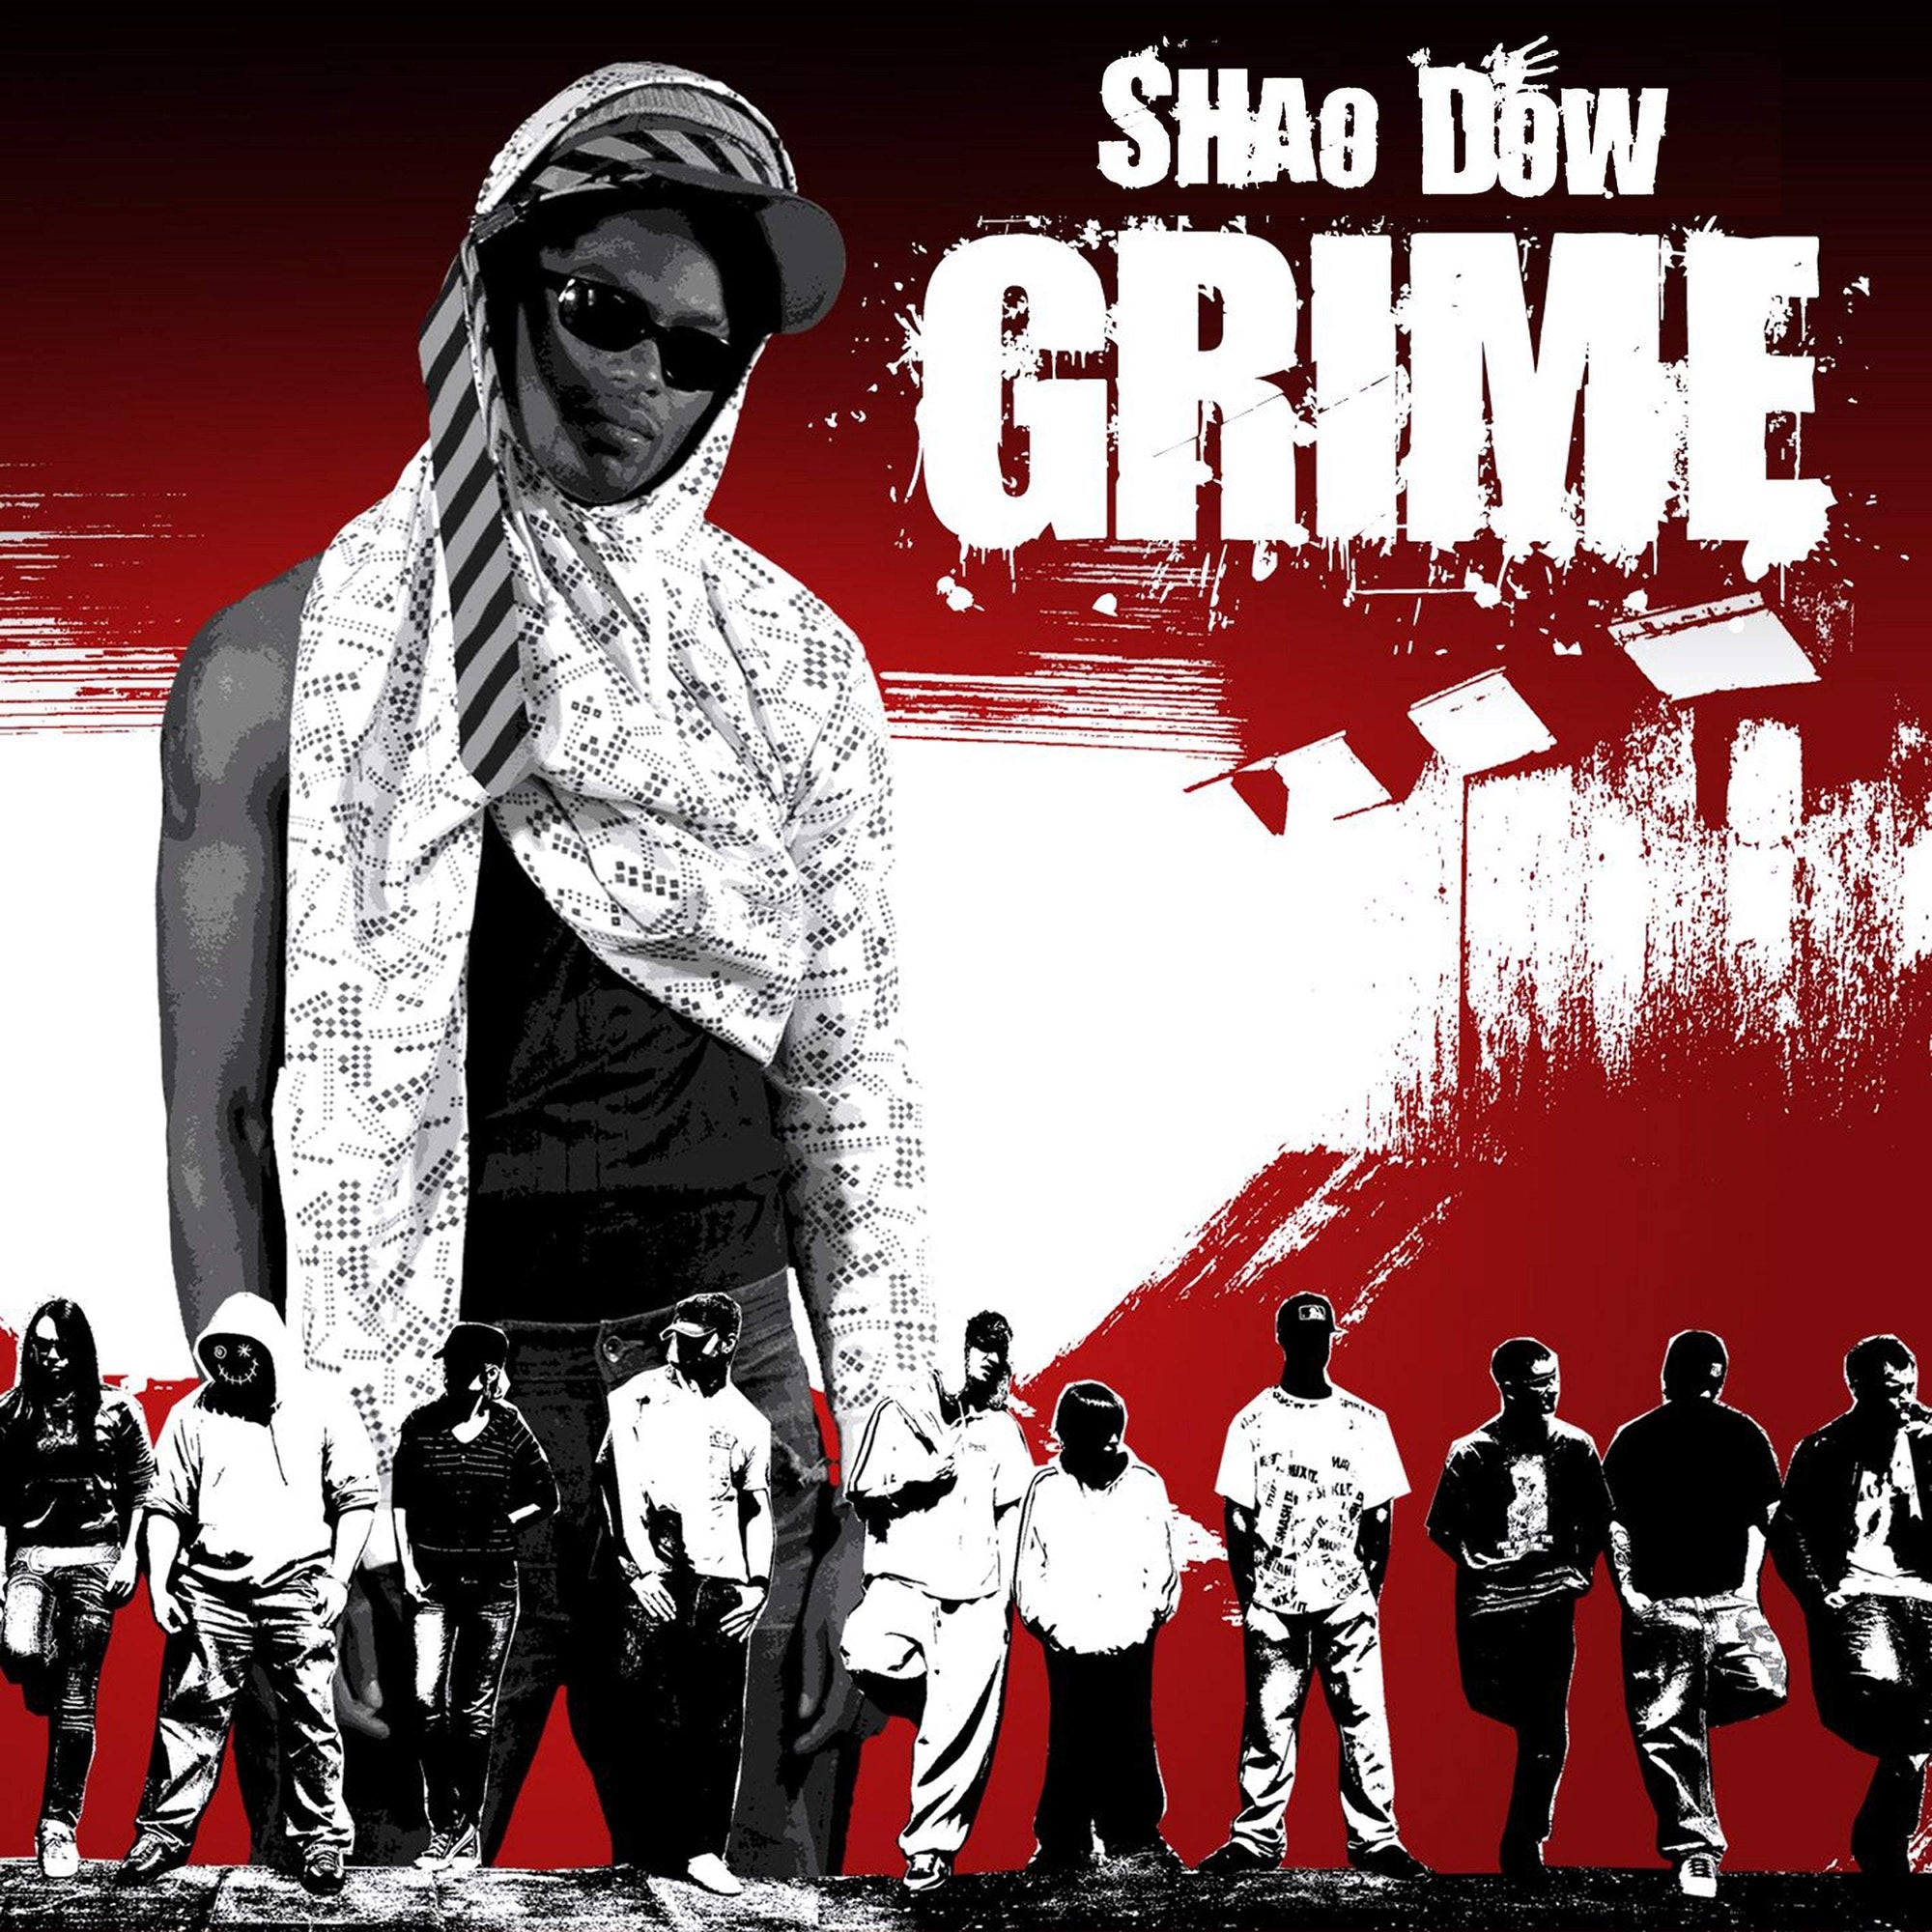 The Grime Single-Shao Dow - The DiY Gang Store-DiY Gang,Grime,Shadow,ShaoDow,Shaowdow,shoadow,The Grime Single